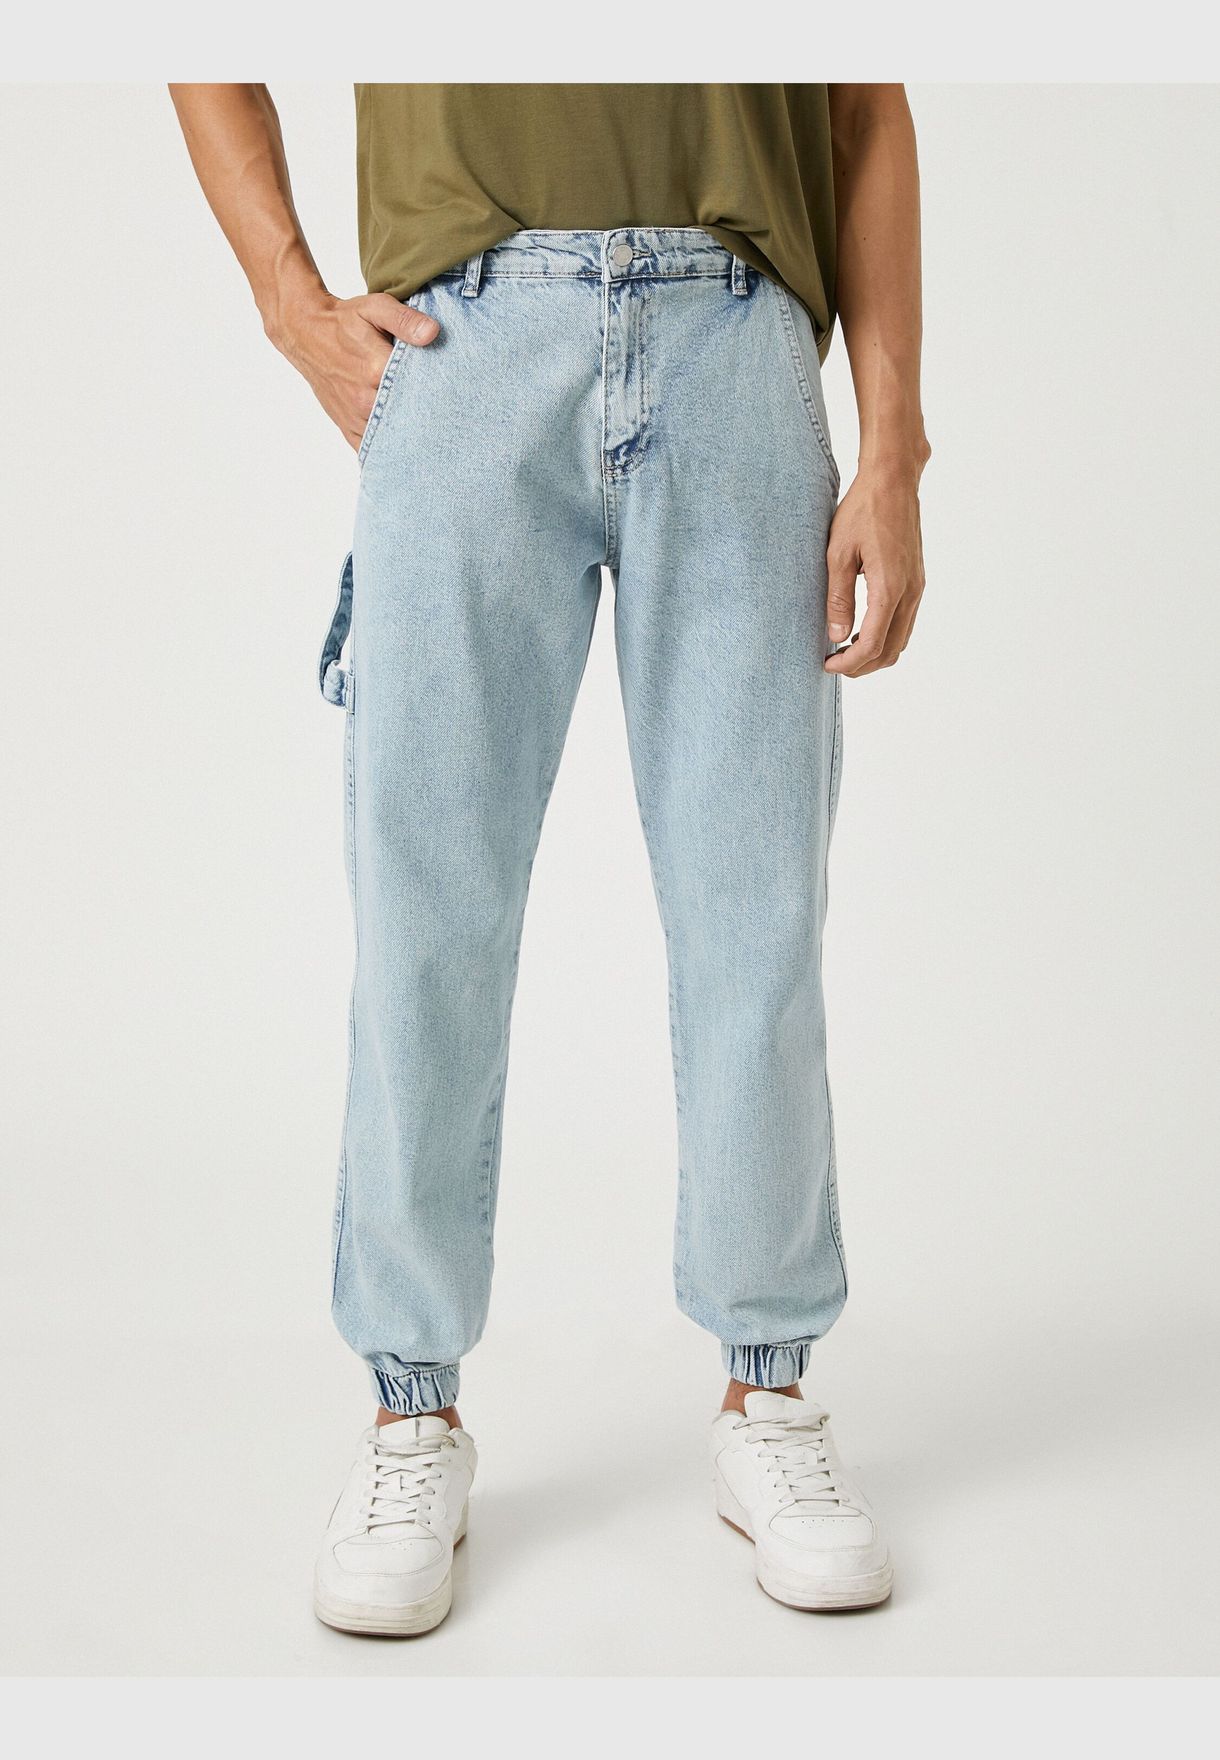 Jogger Jean Trousers Buttoned Pocket Detailed Cotton